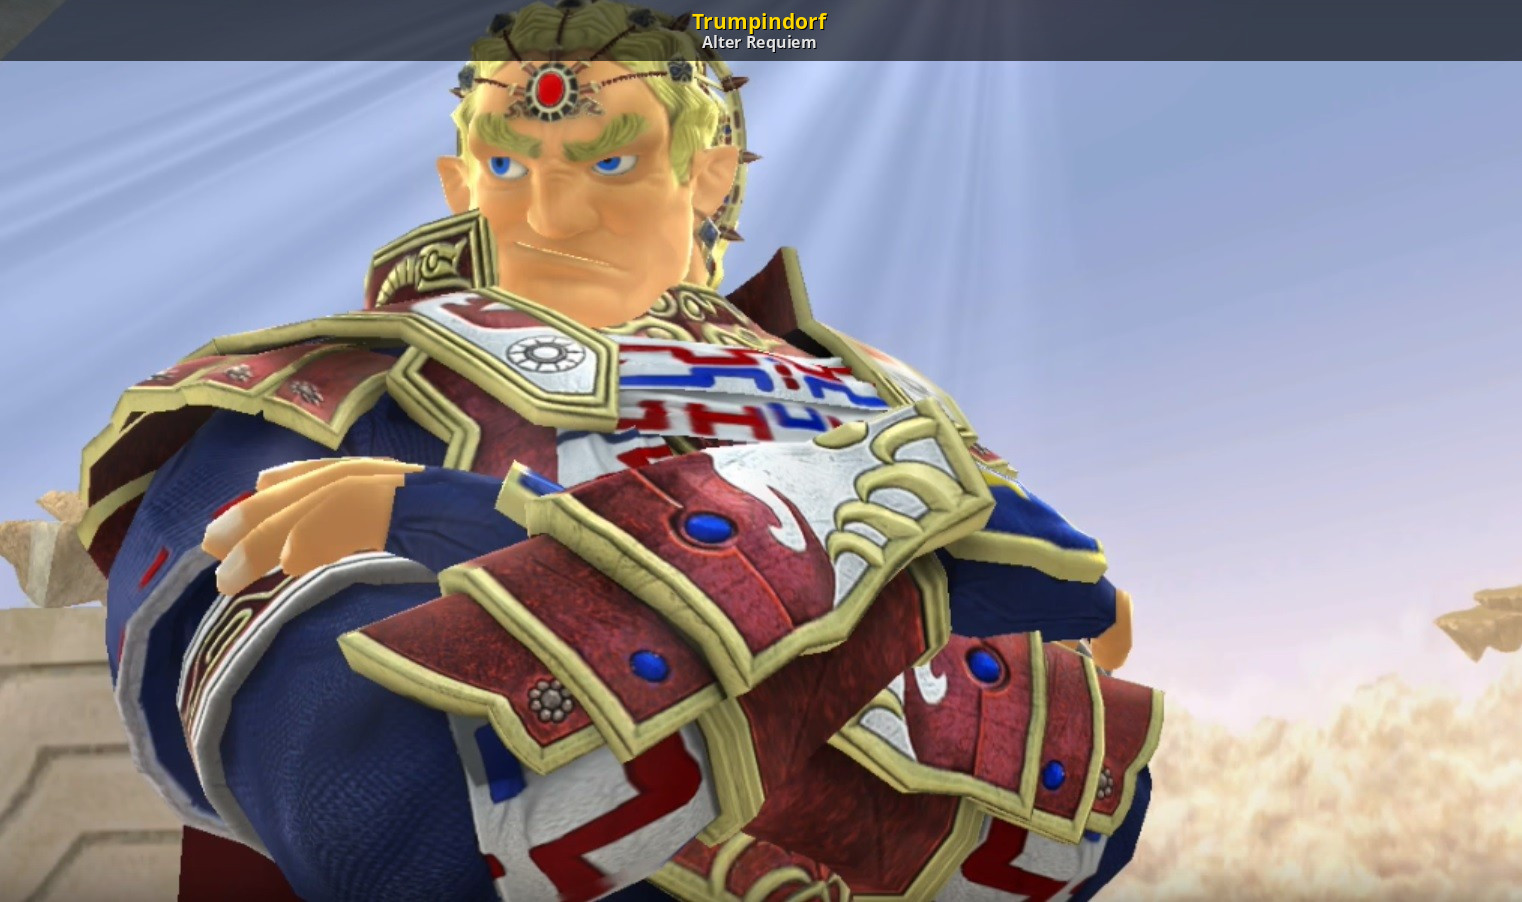 (Wii U) (SSB4U) Mod in the Ganondorf category, submitted by Alter Requiem.